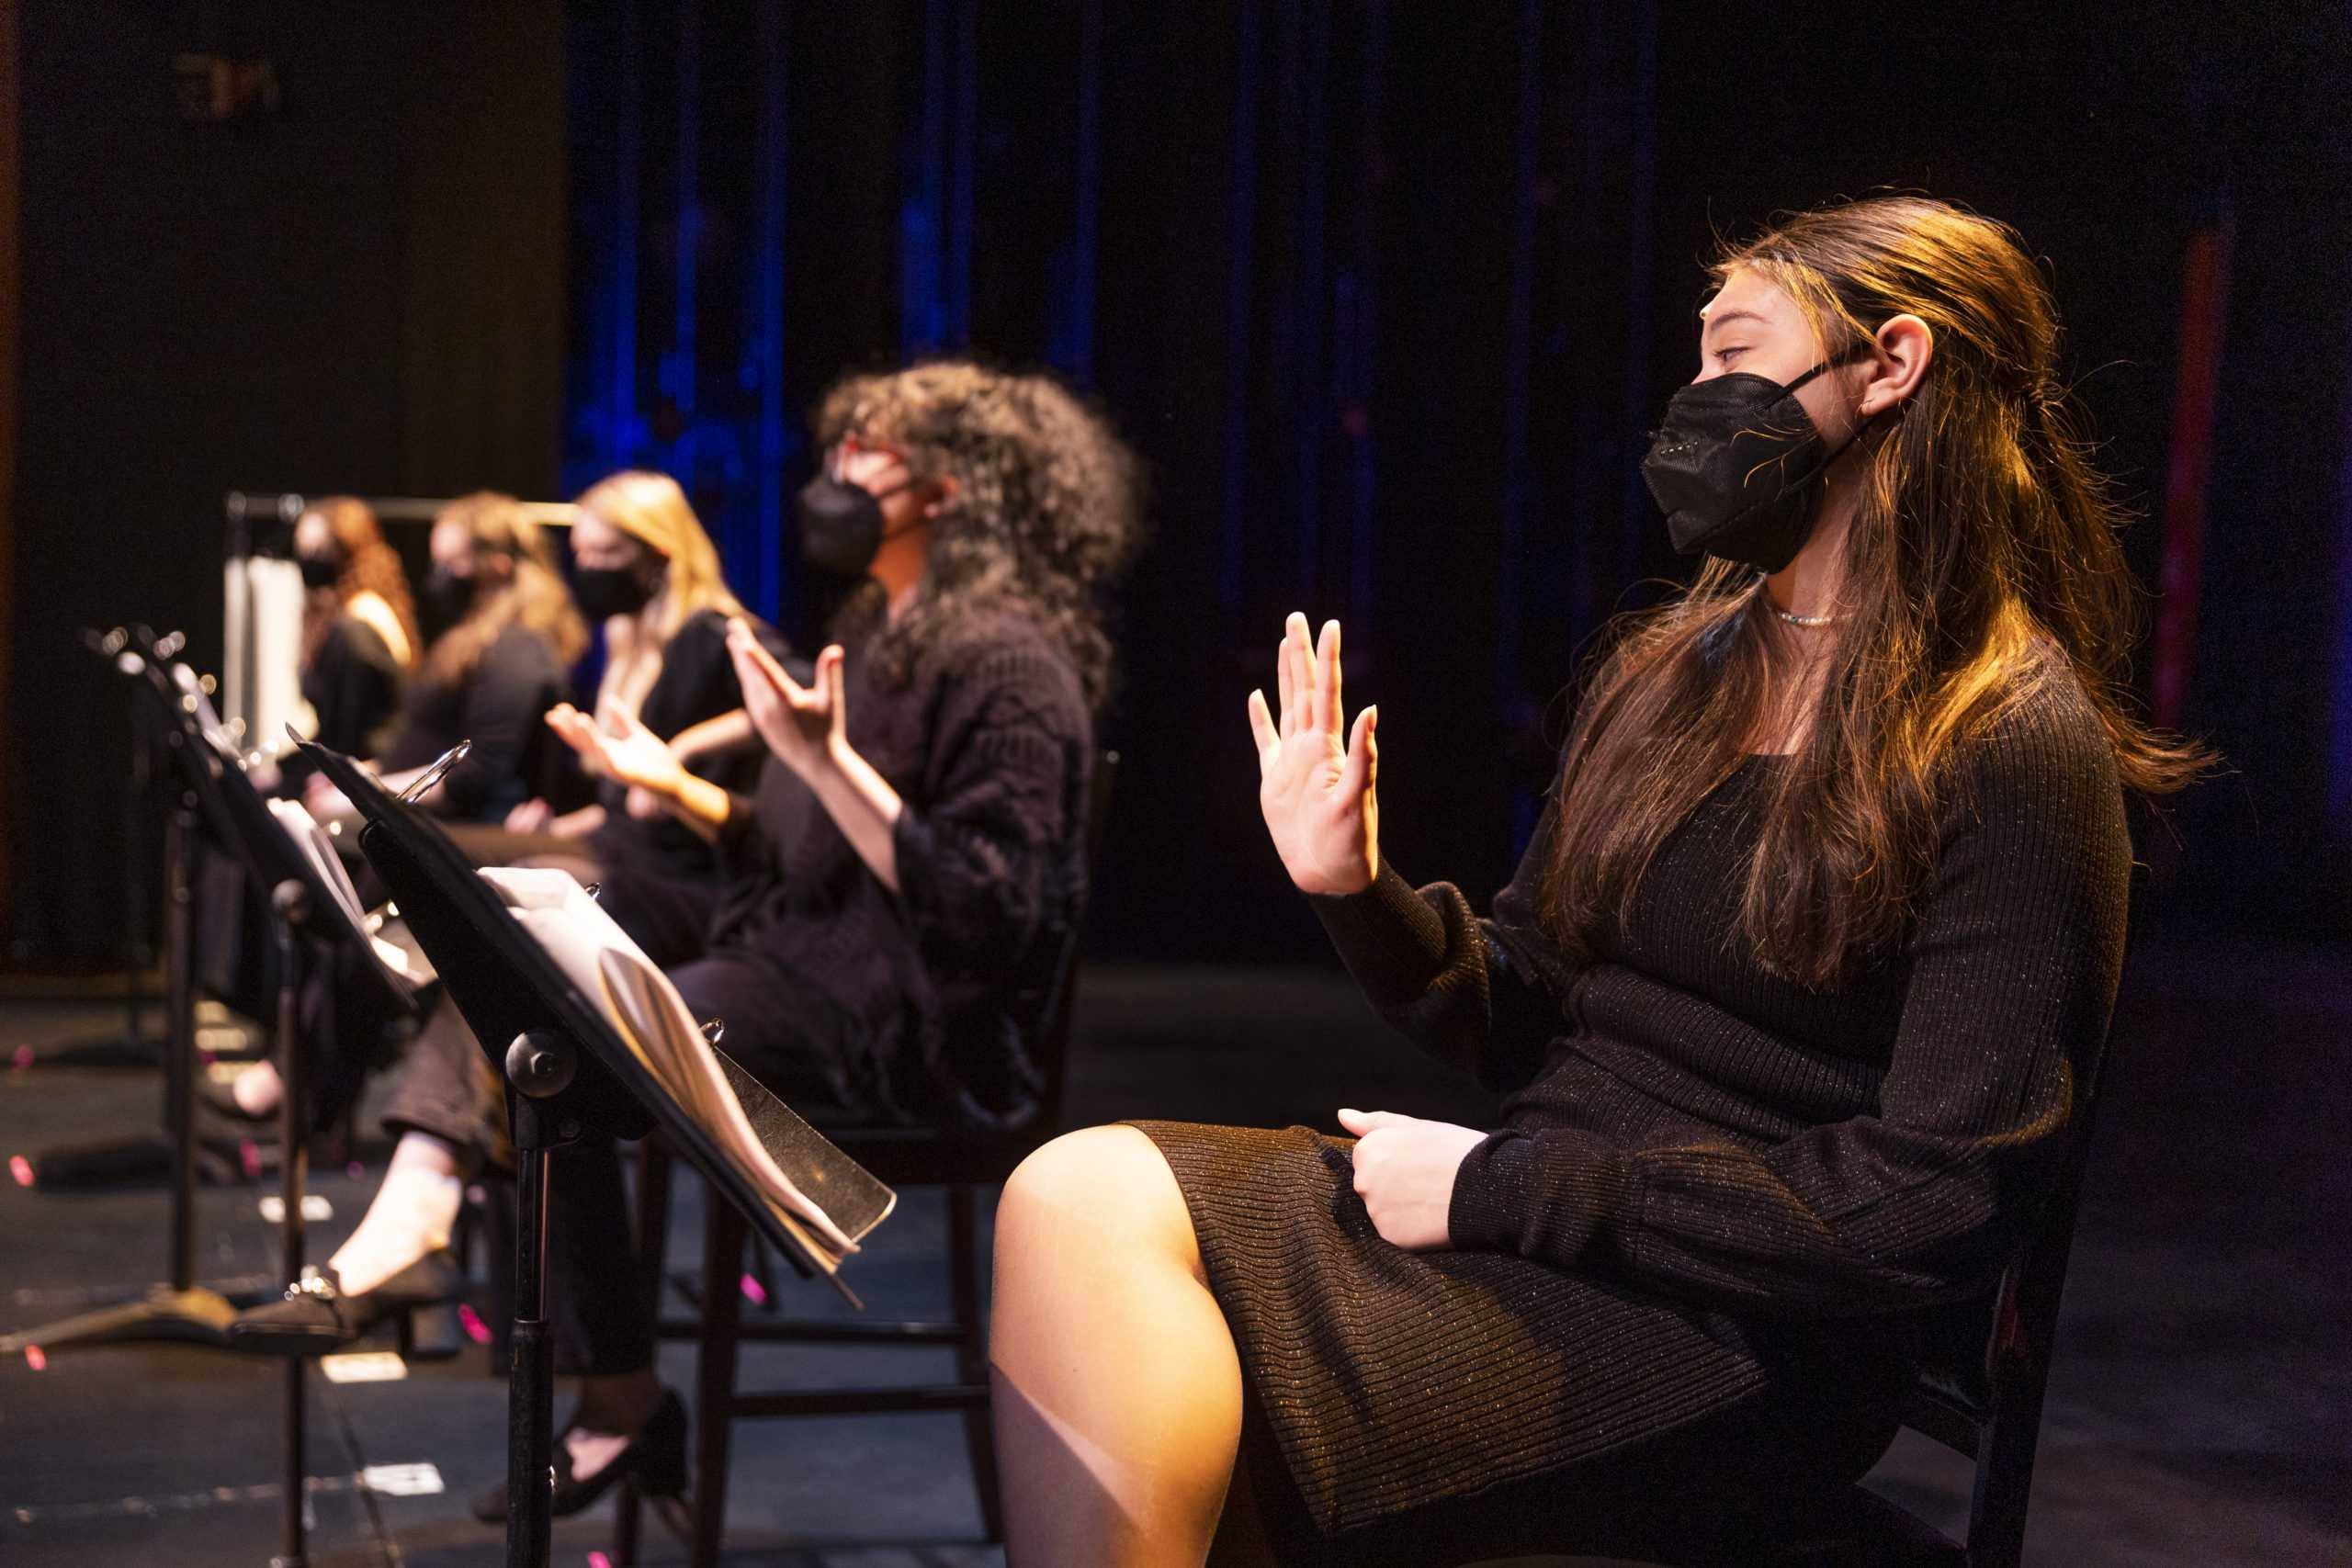 Nikole Platenecky ’25 performs one of her scenes. For the performances, actors will not be required to wear masks. PHOTO: MITCHELL SHIELDS 22/THE HAWK